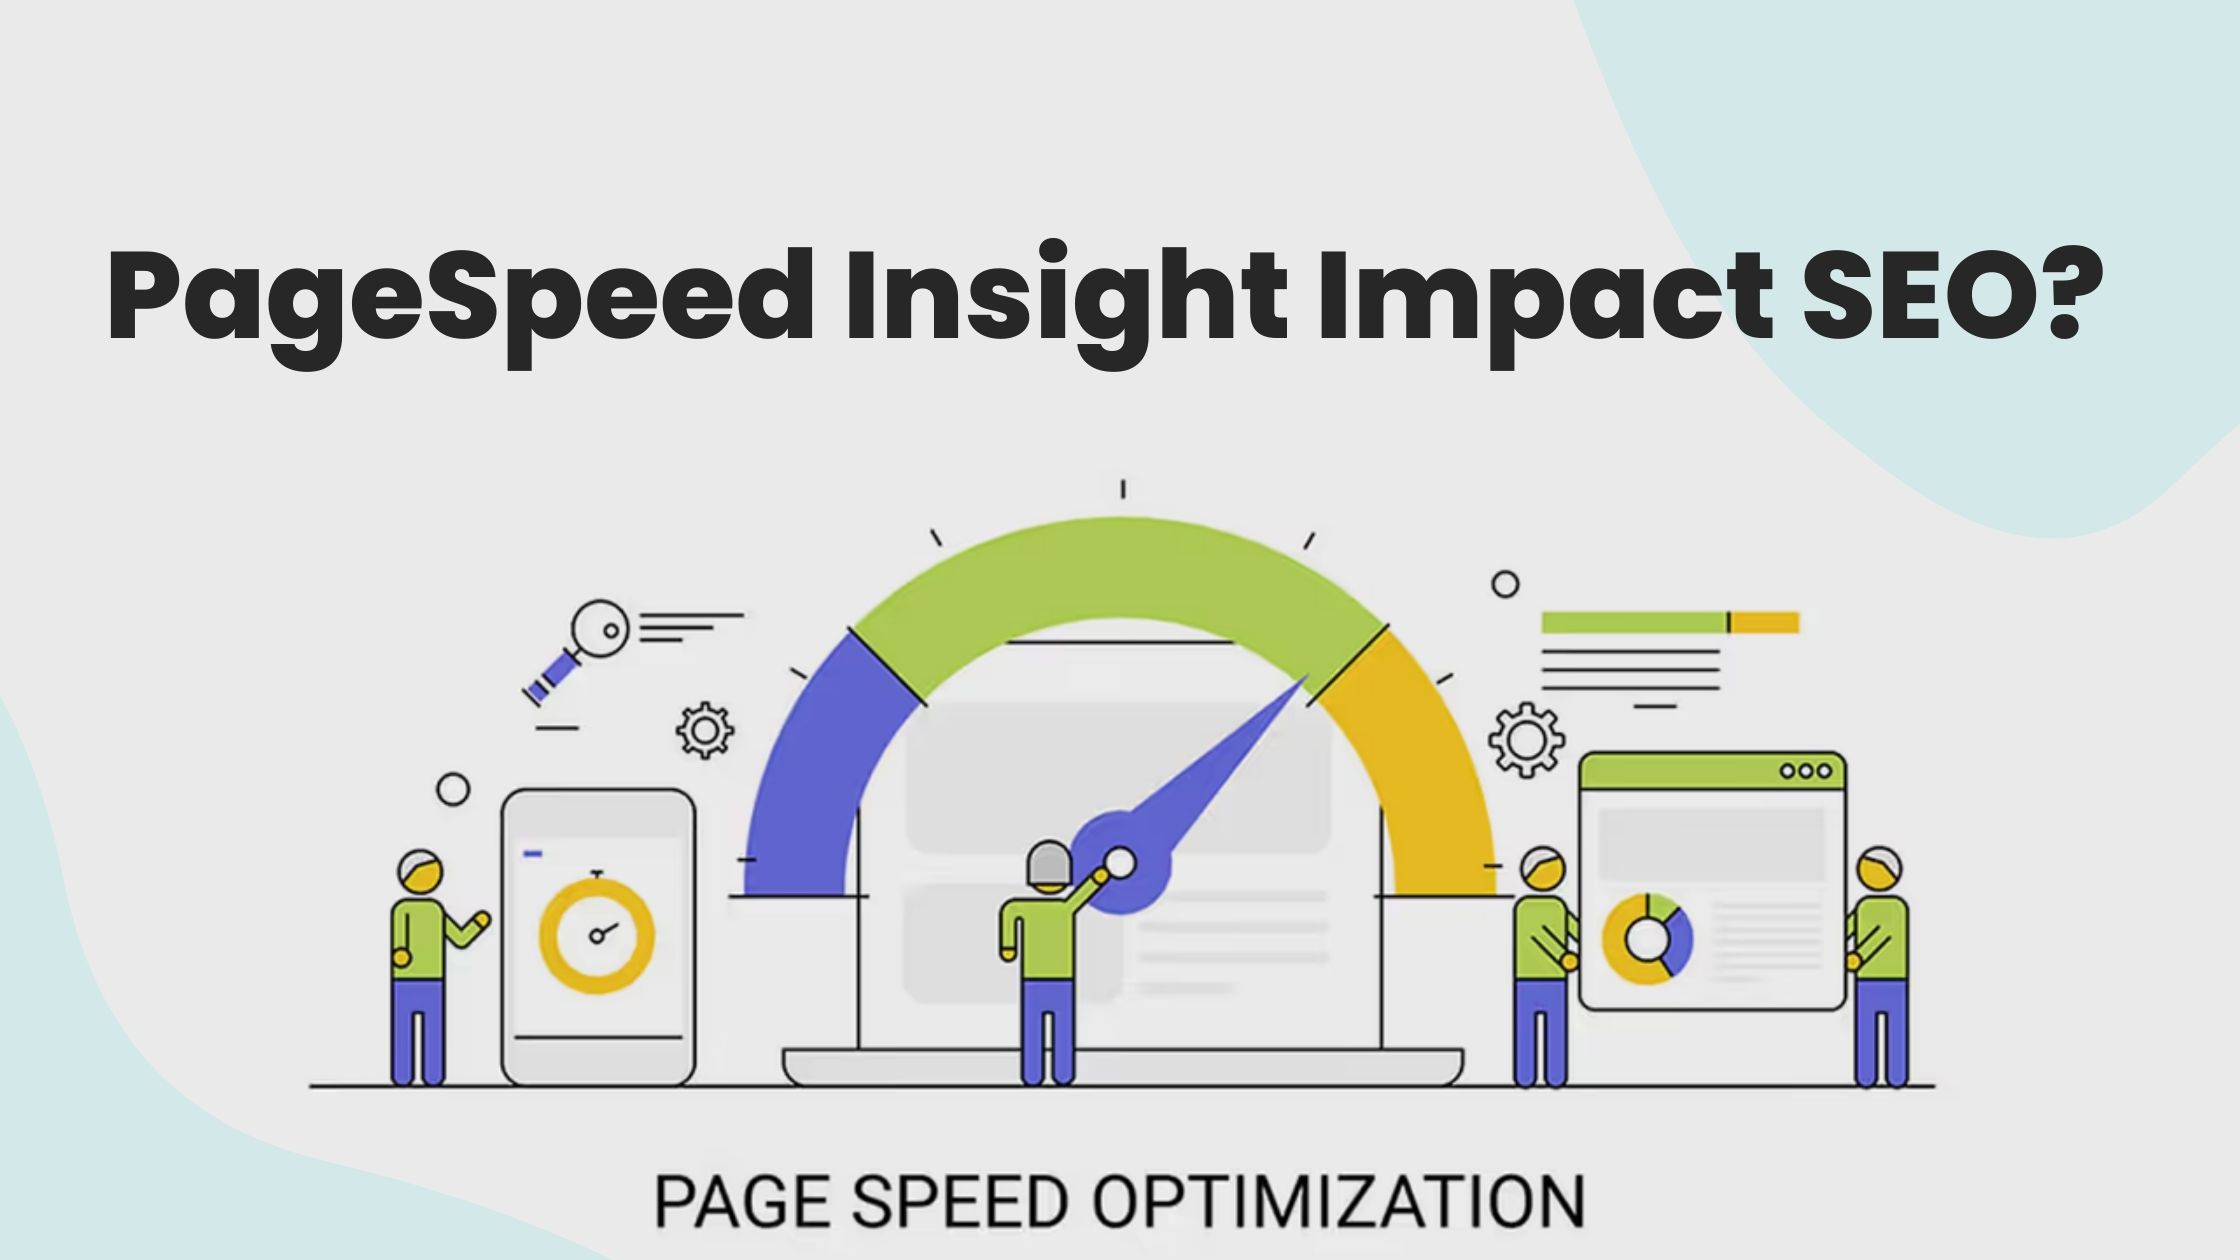 PageSpeed Insight Impact SEO